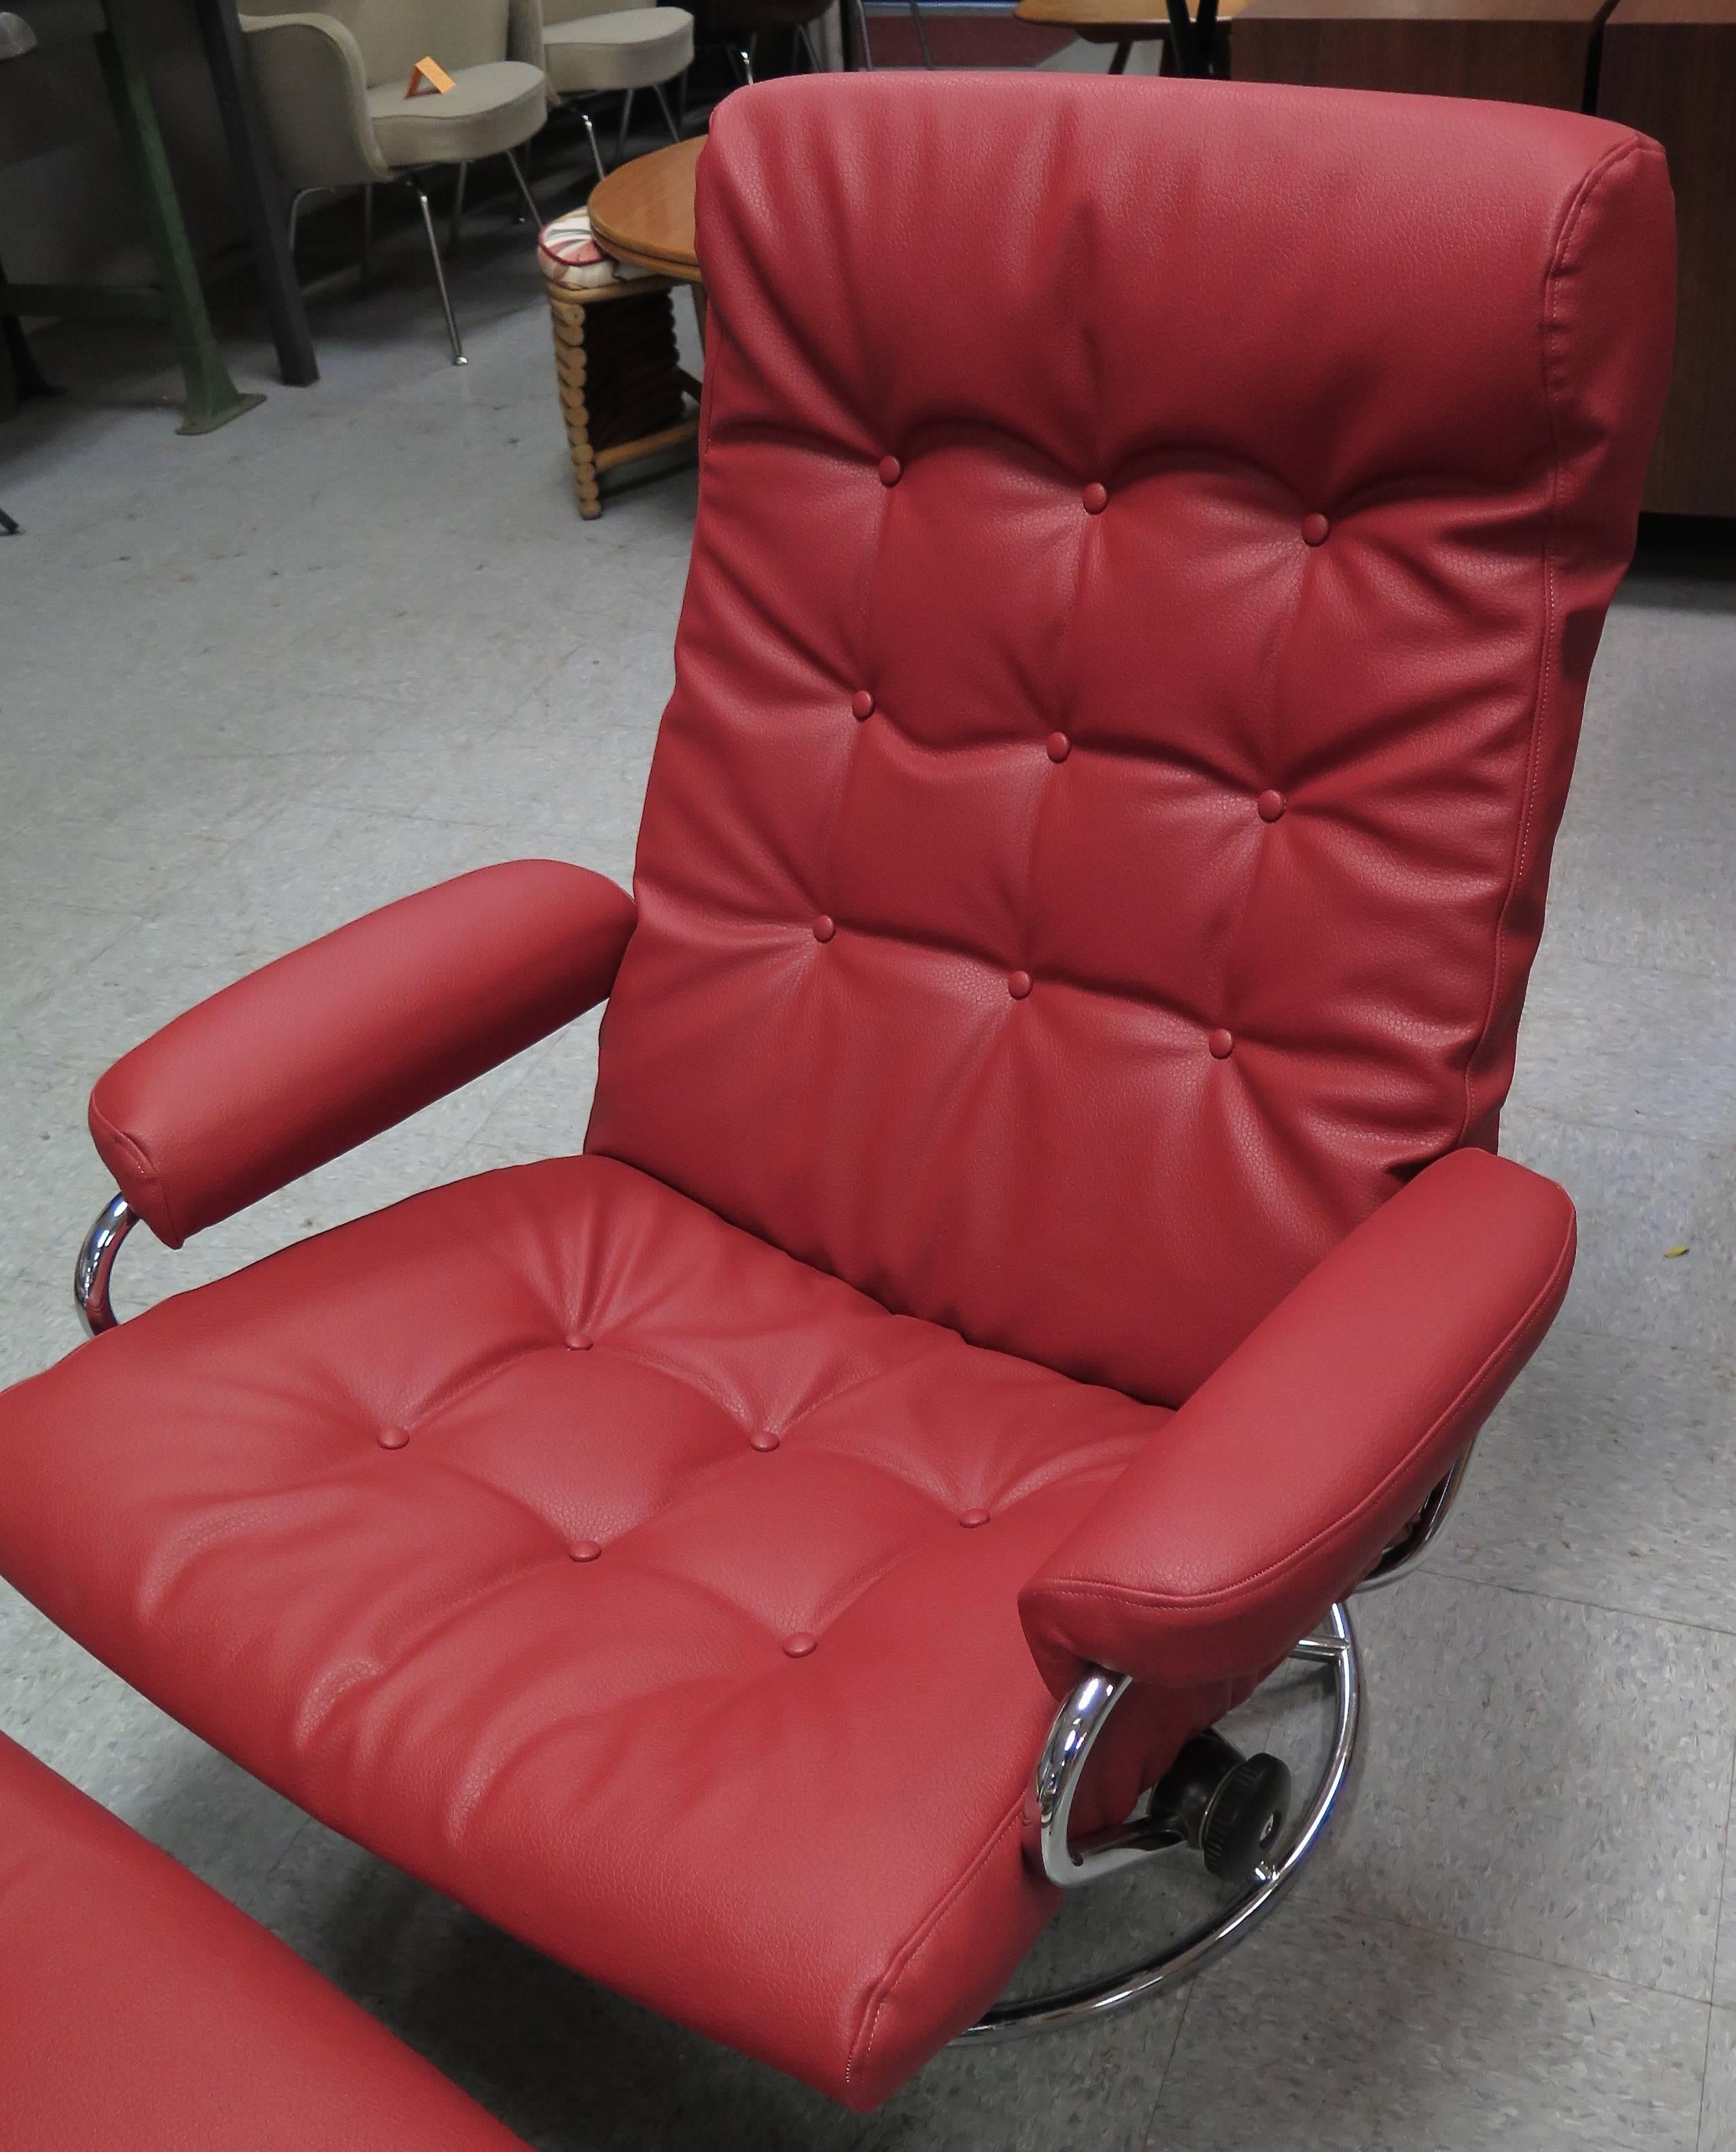 New recycled cranberry color leather. Adjustable handles on side of chair for full recline position. Chrome has some scuffs. Ottoman measures 22 in. x 18 in. x 14.5 in.